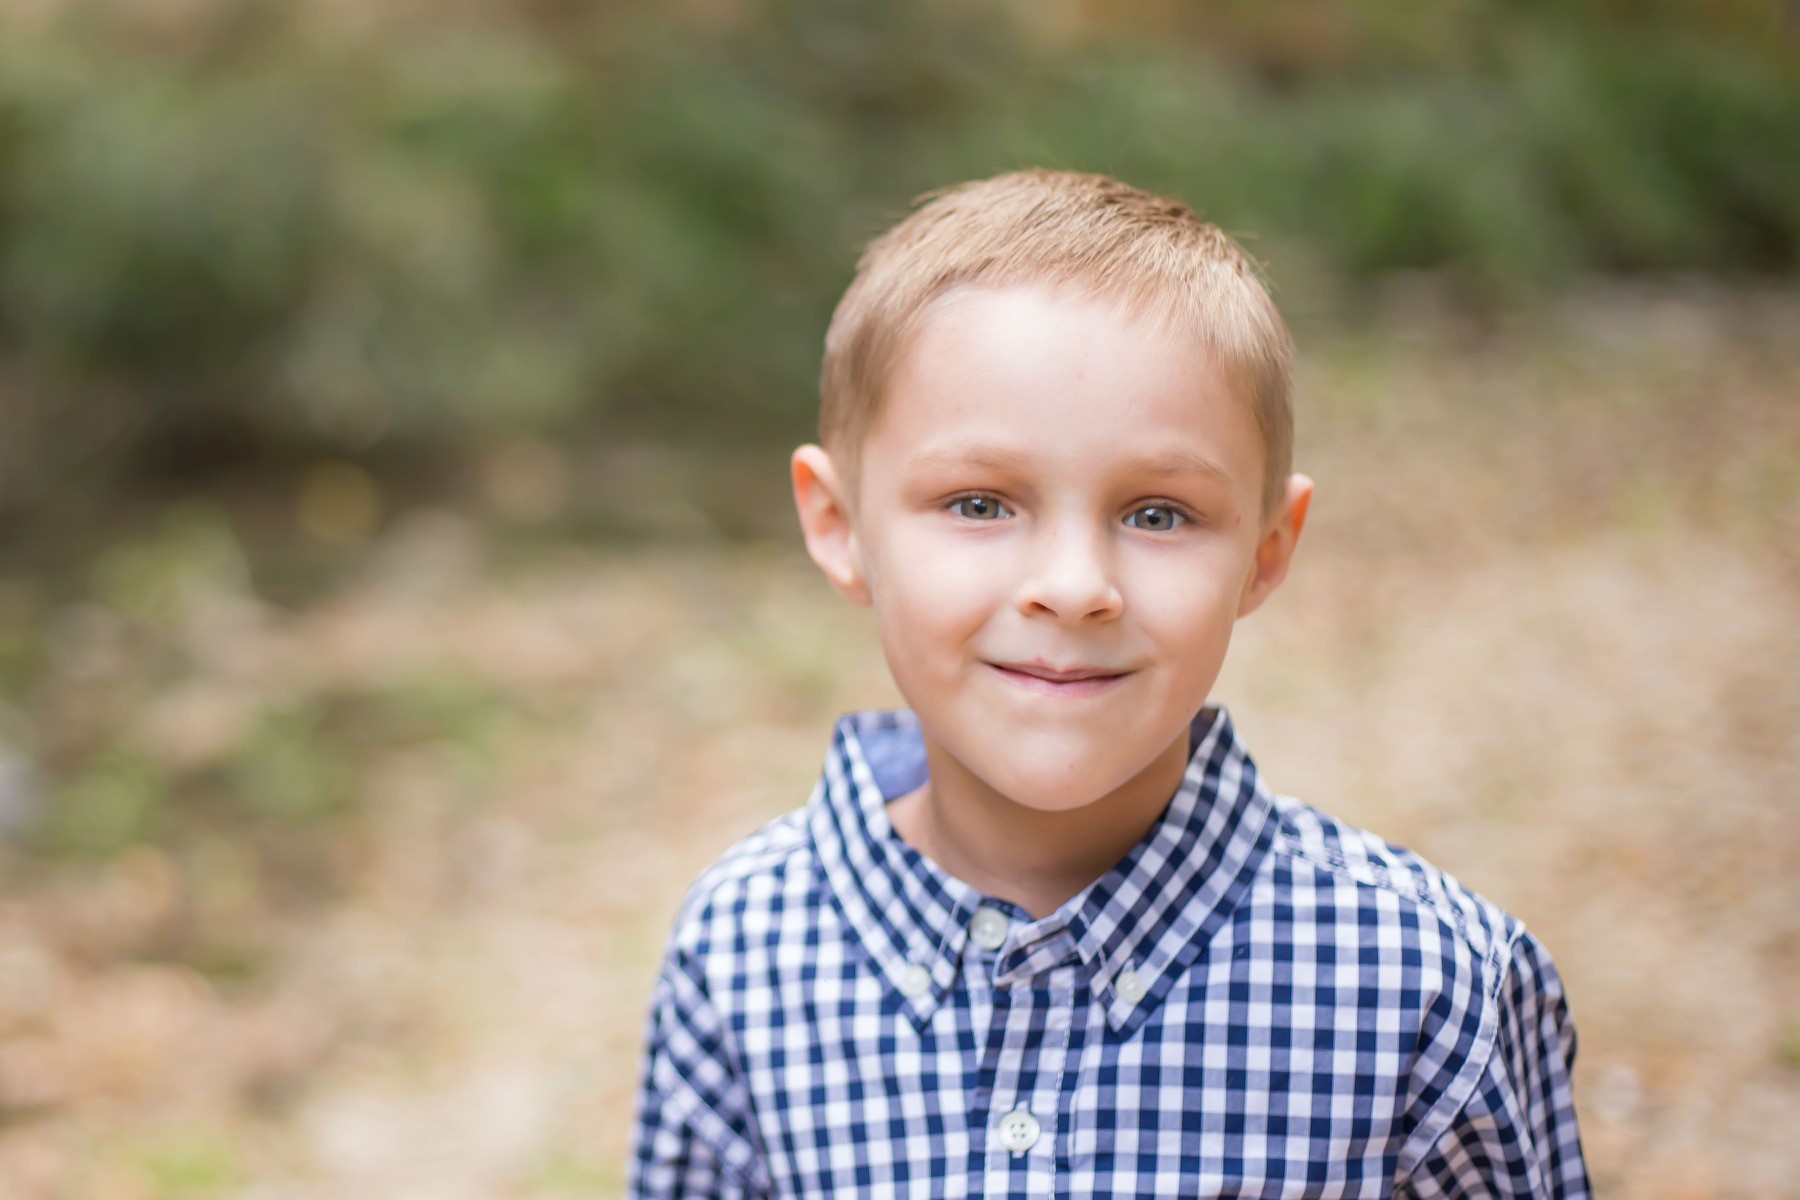 Blood is so important to Ryder and his family as he awaits stem cell transplant 